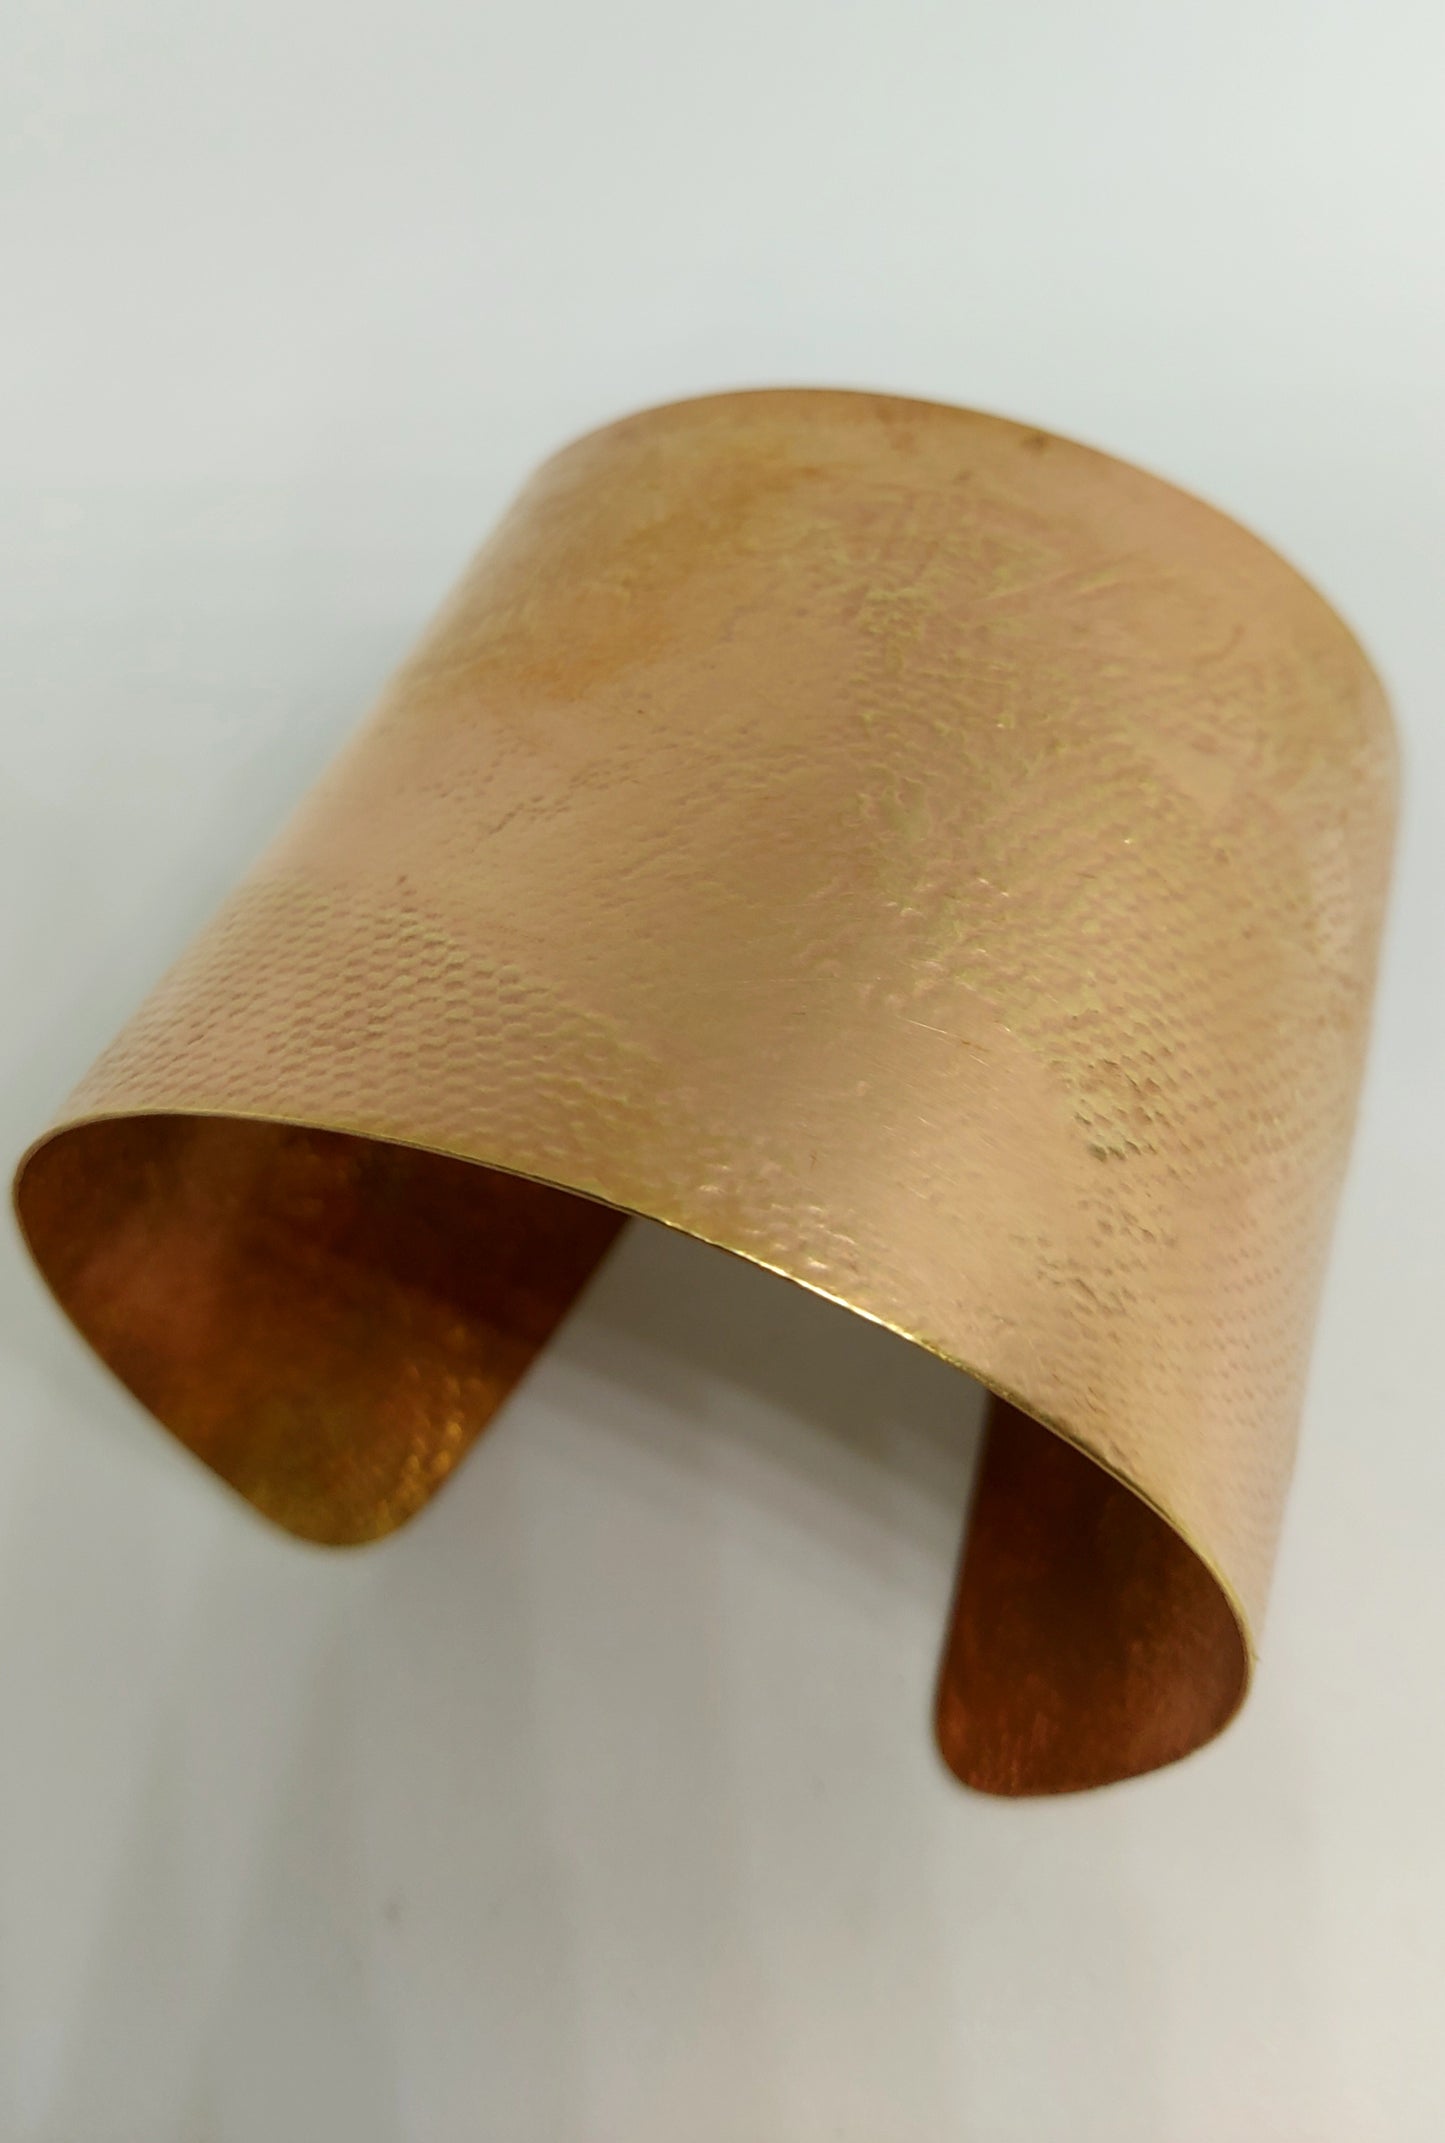 Hand-crafted texturized brass cuff, (2" inches)